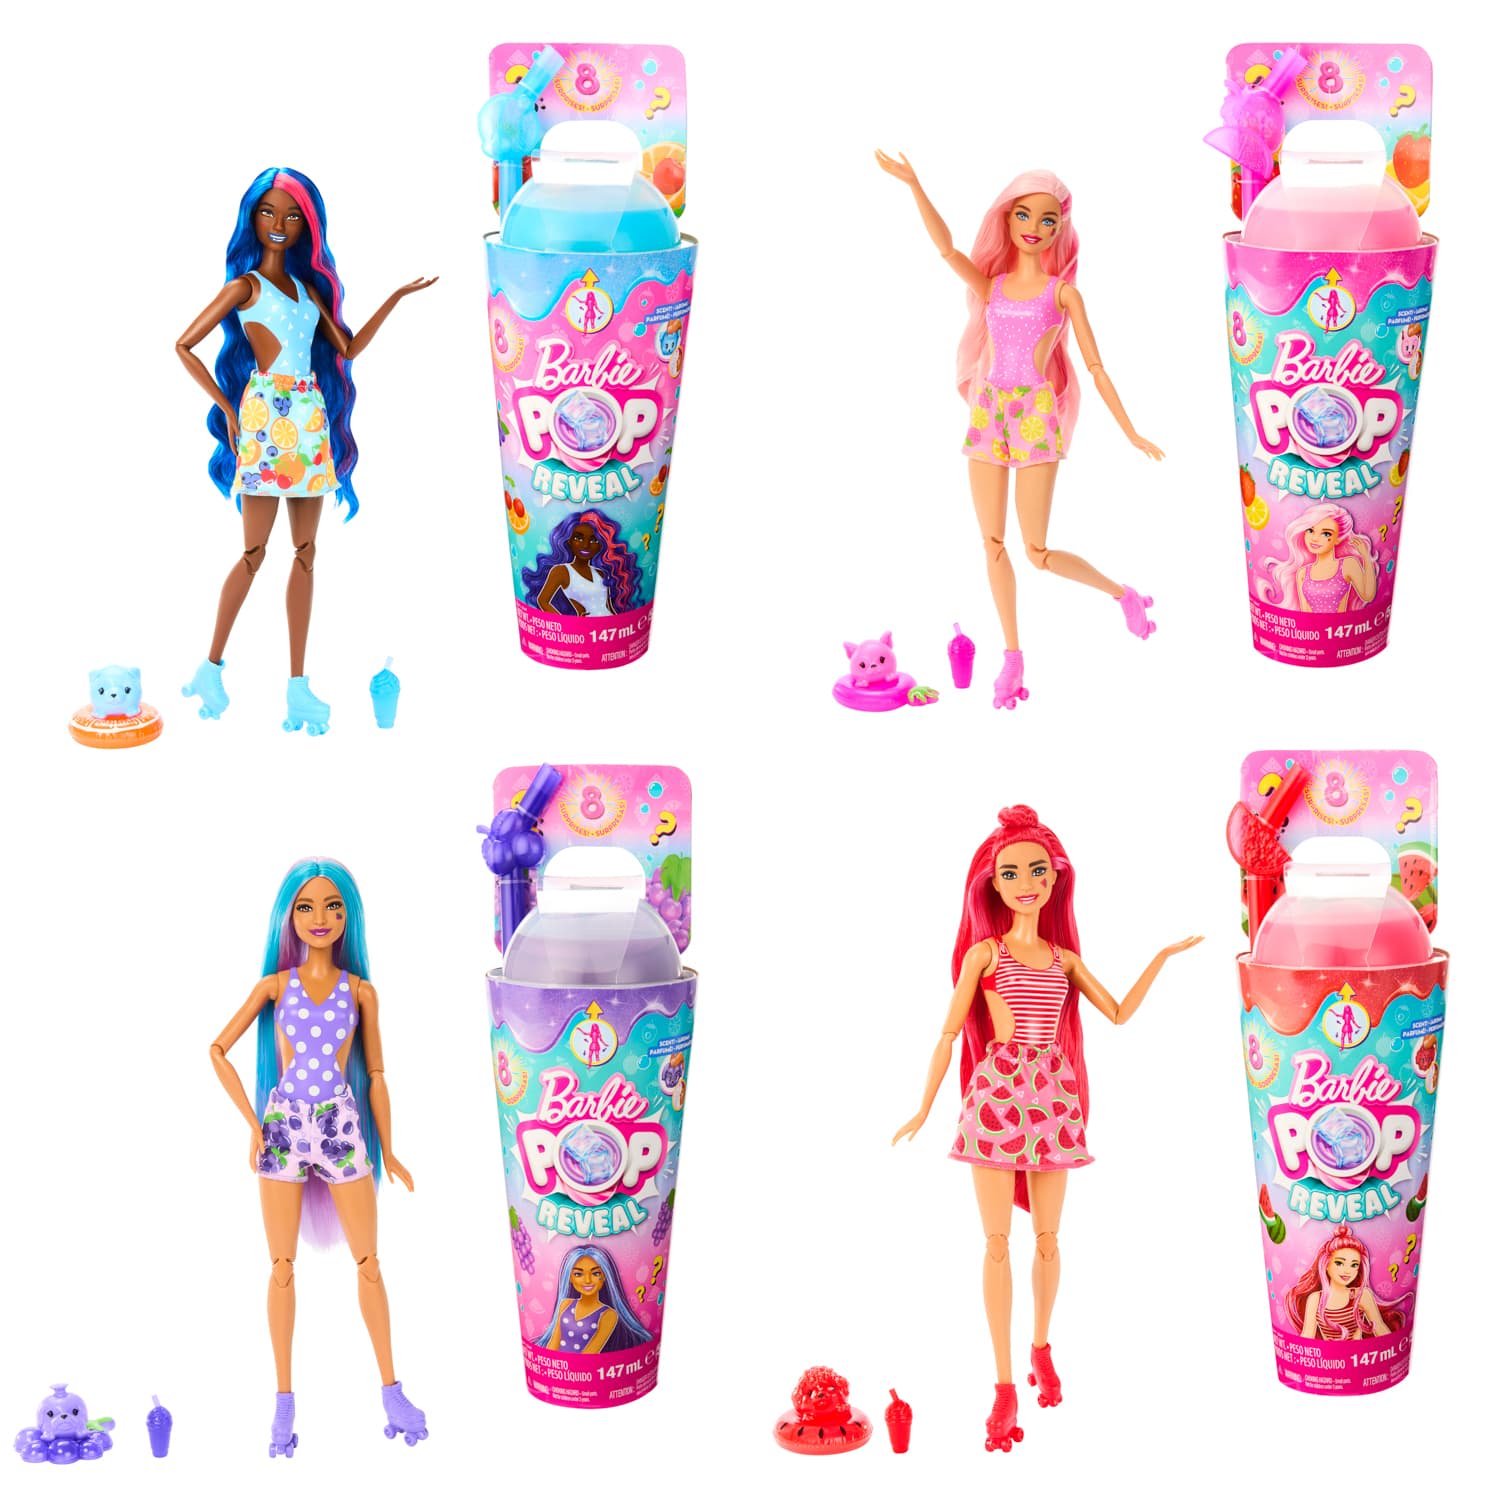 Image of Barbie Pop Reveal Doll - Assorted